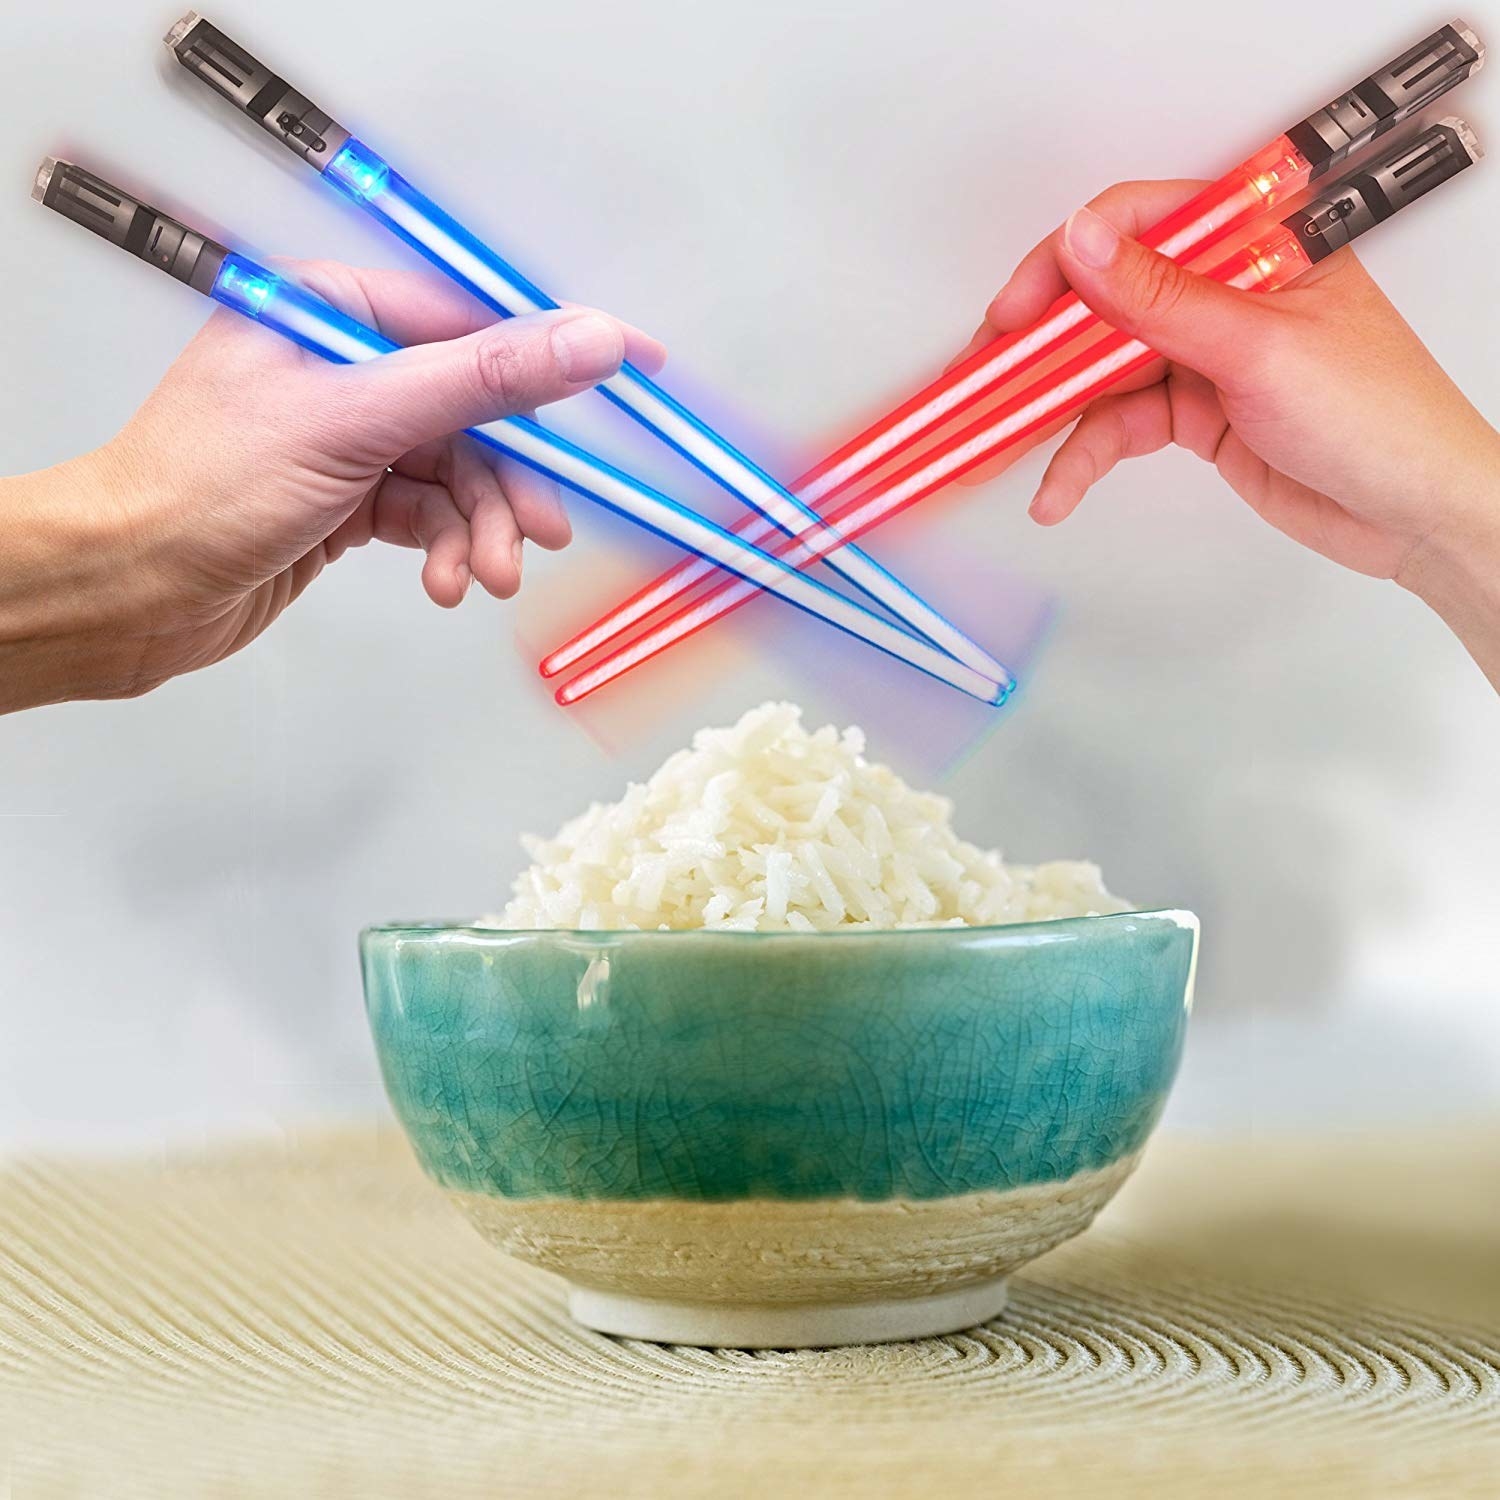 Two people battling over rice with the light-up chopsticks.